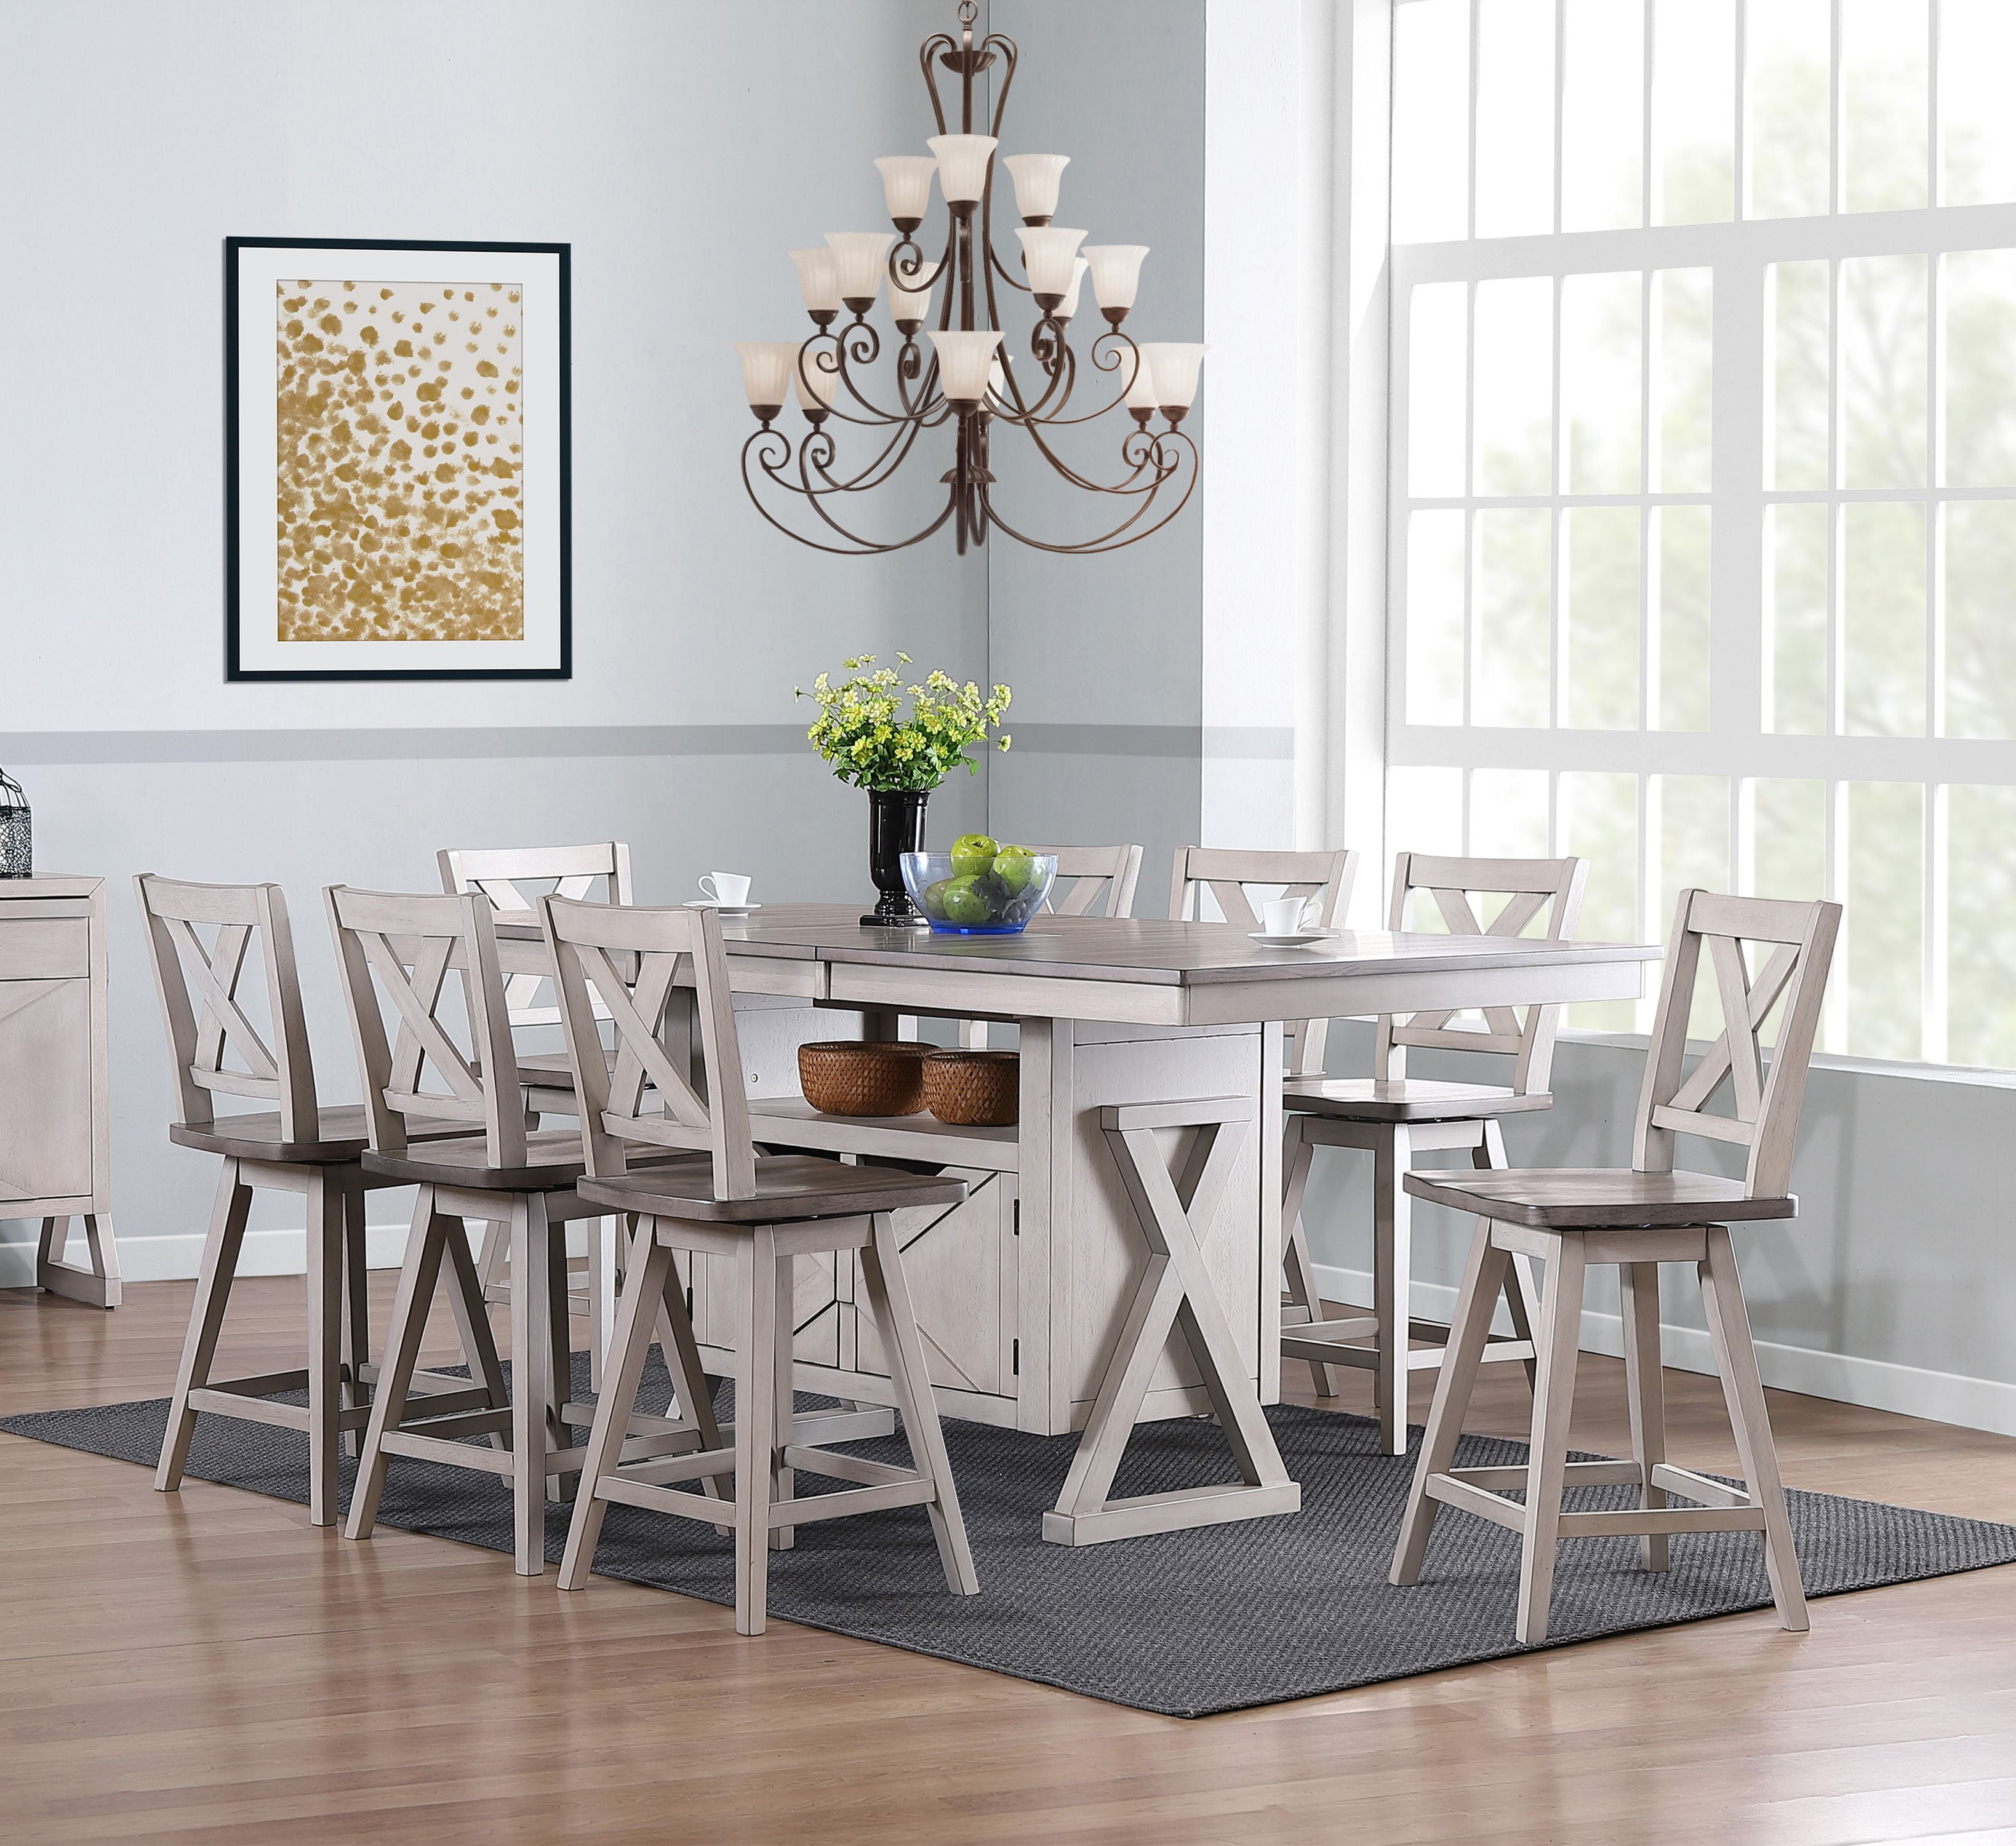 Distract Objection cancer Figaro 9 Piece Storage Dining Set, Wash Gray Wood (Table, 8 Chairs) -  Walmart.com